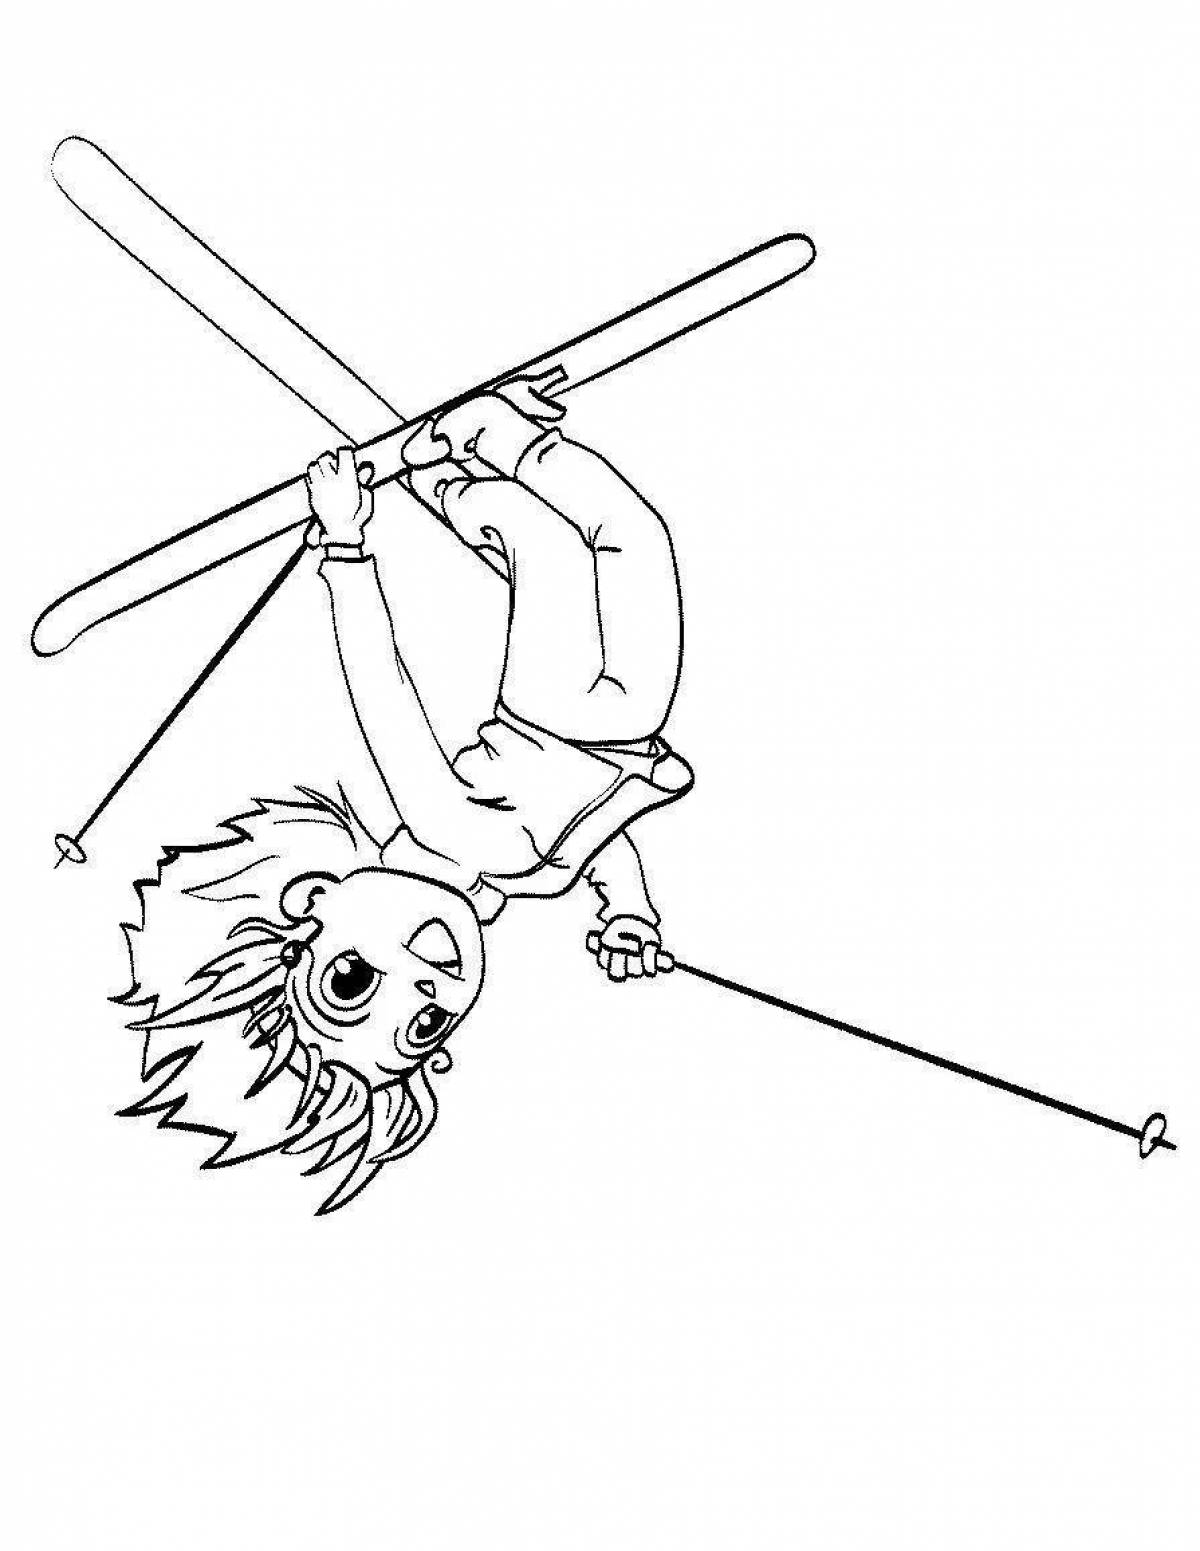 Fearless ski jump coloring page